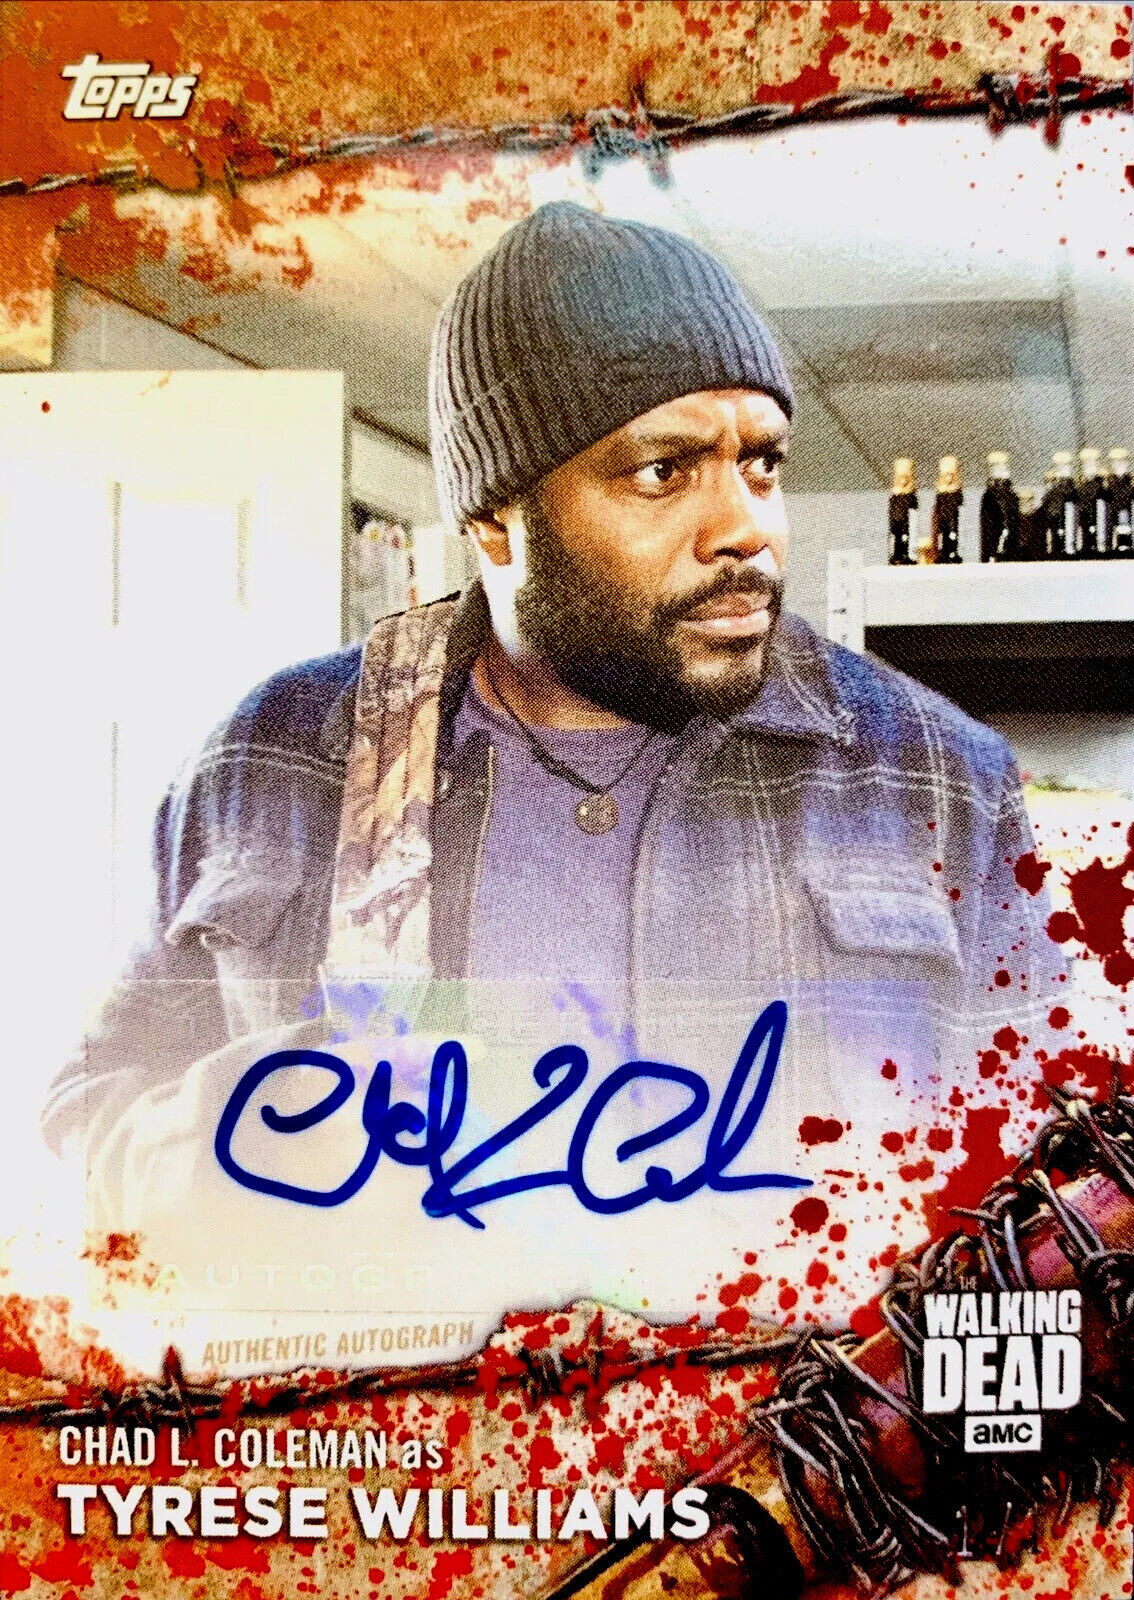 Topps Walking Dead On Demand Chad L. Coleman/Tyreese Williams Auto Blood 1/1 MT+